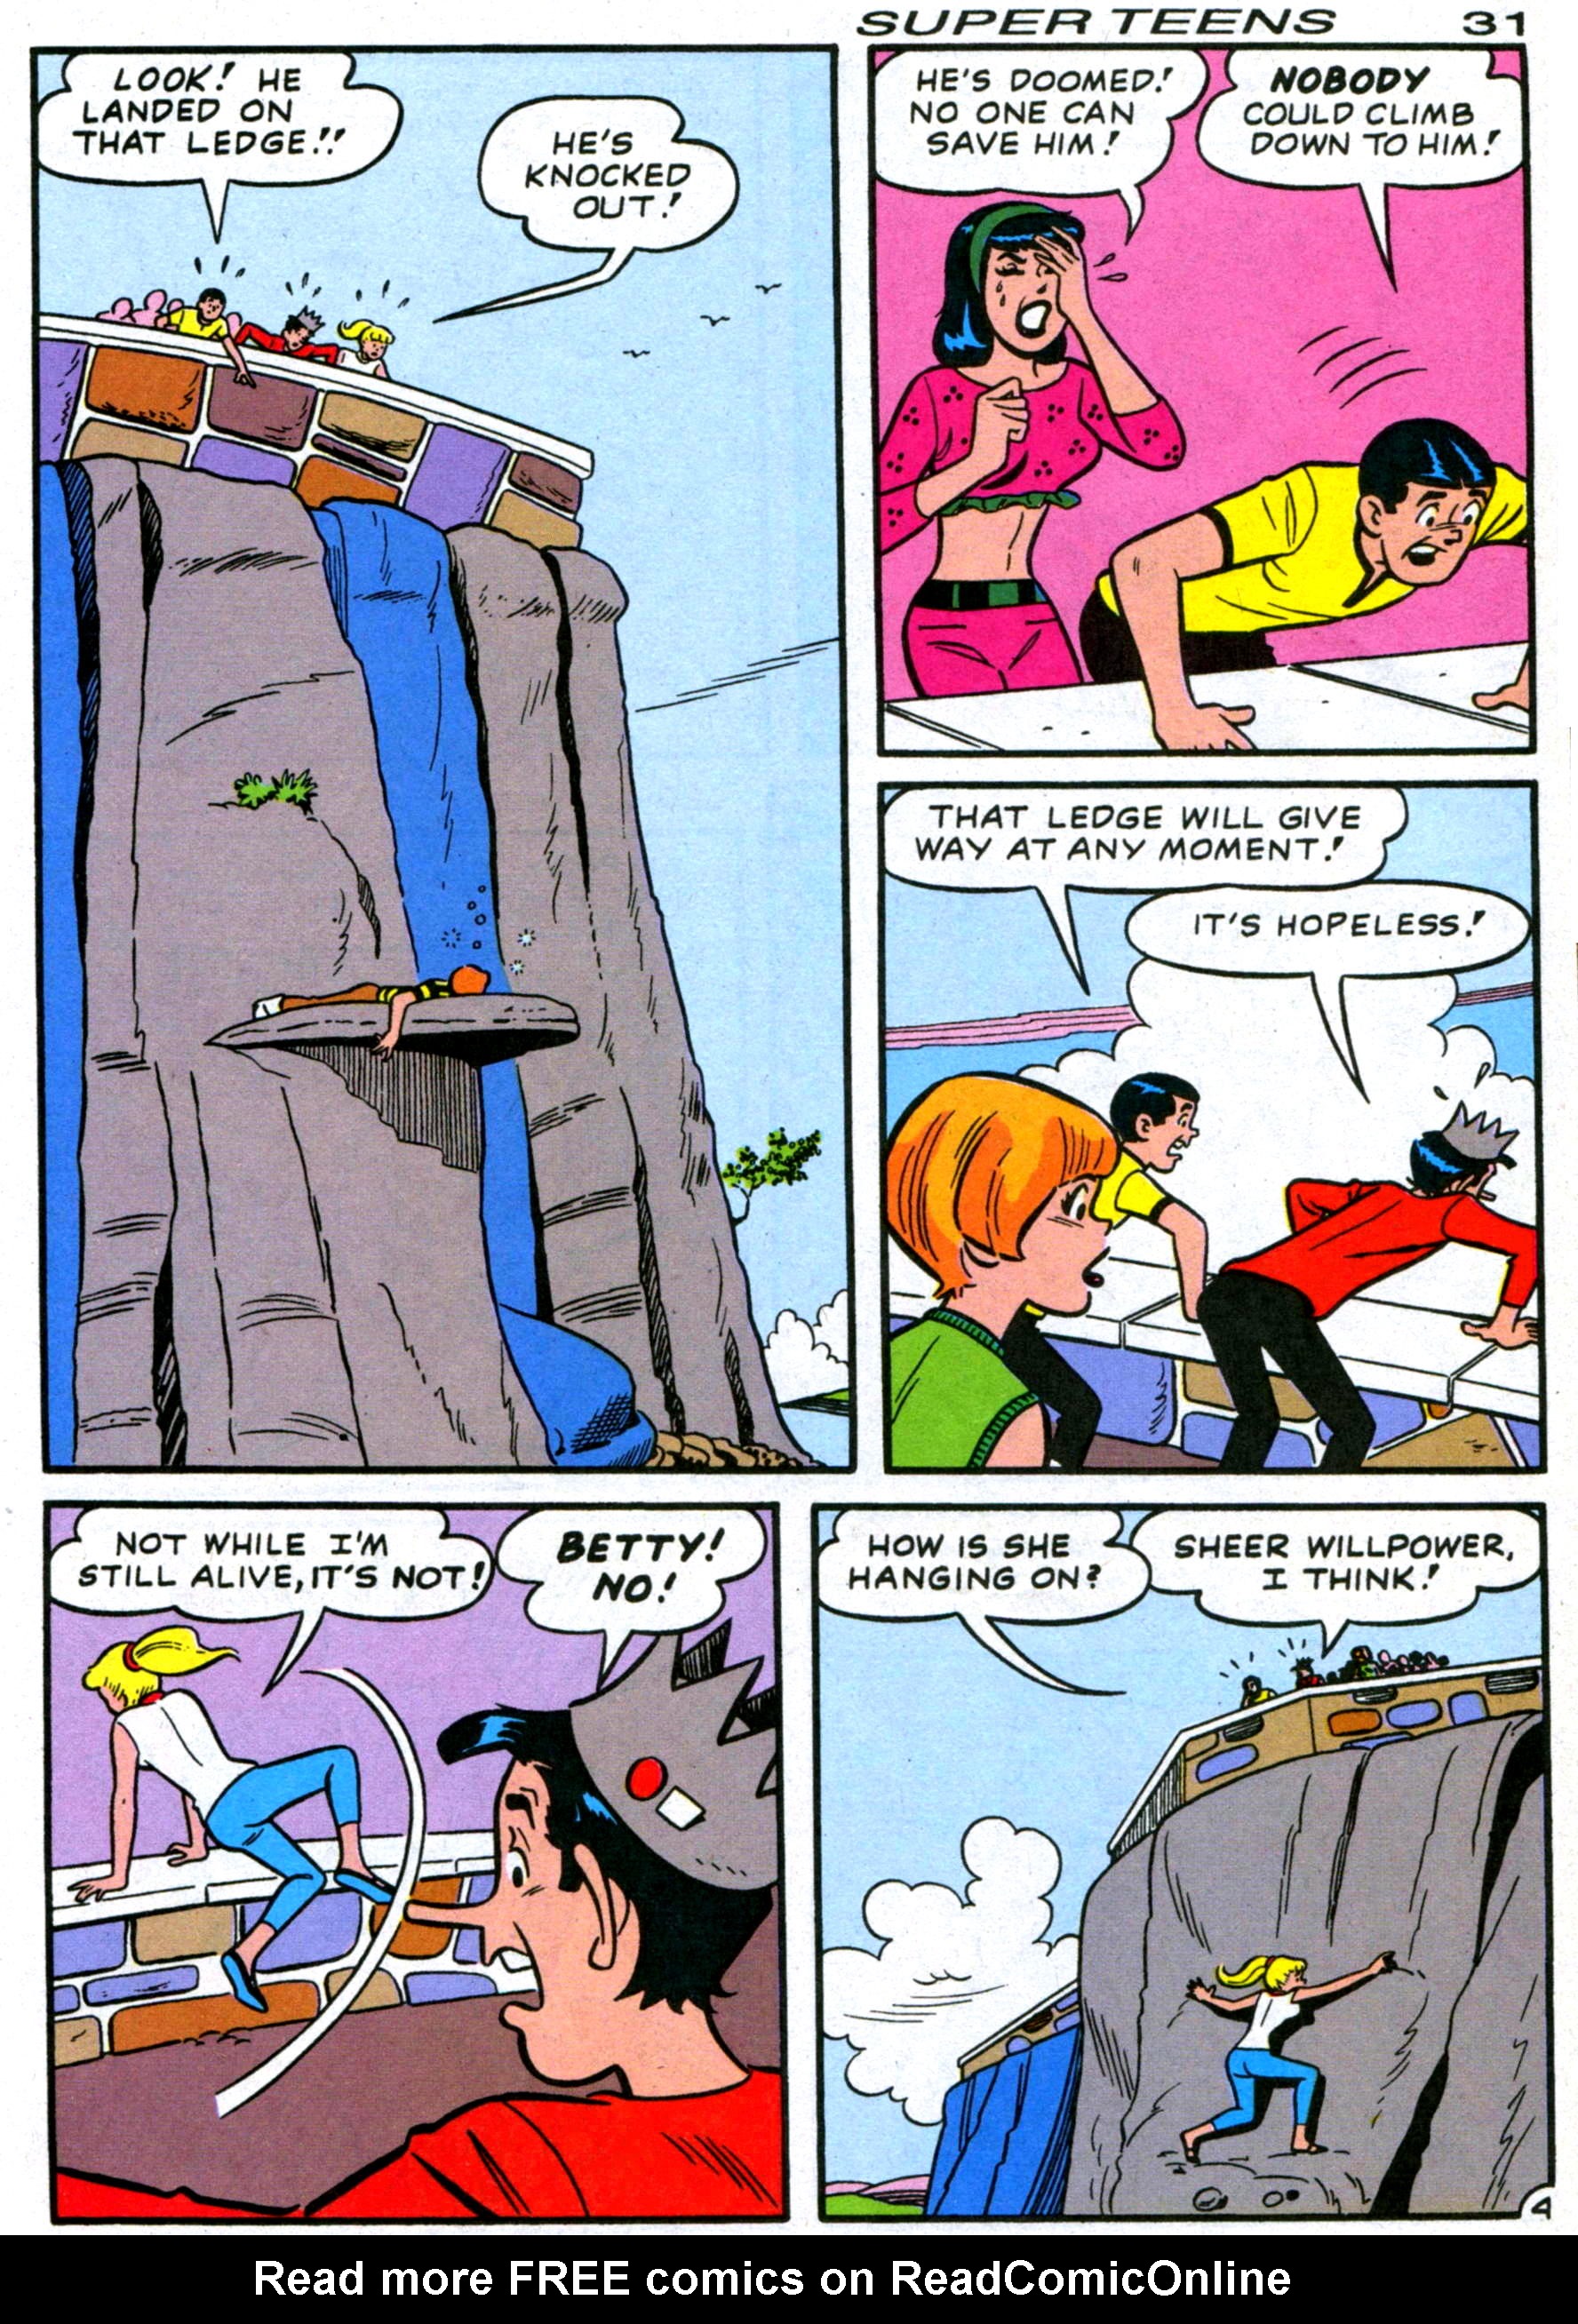 Read online Archie's Super Teens comic -  Issue #1 - 33